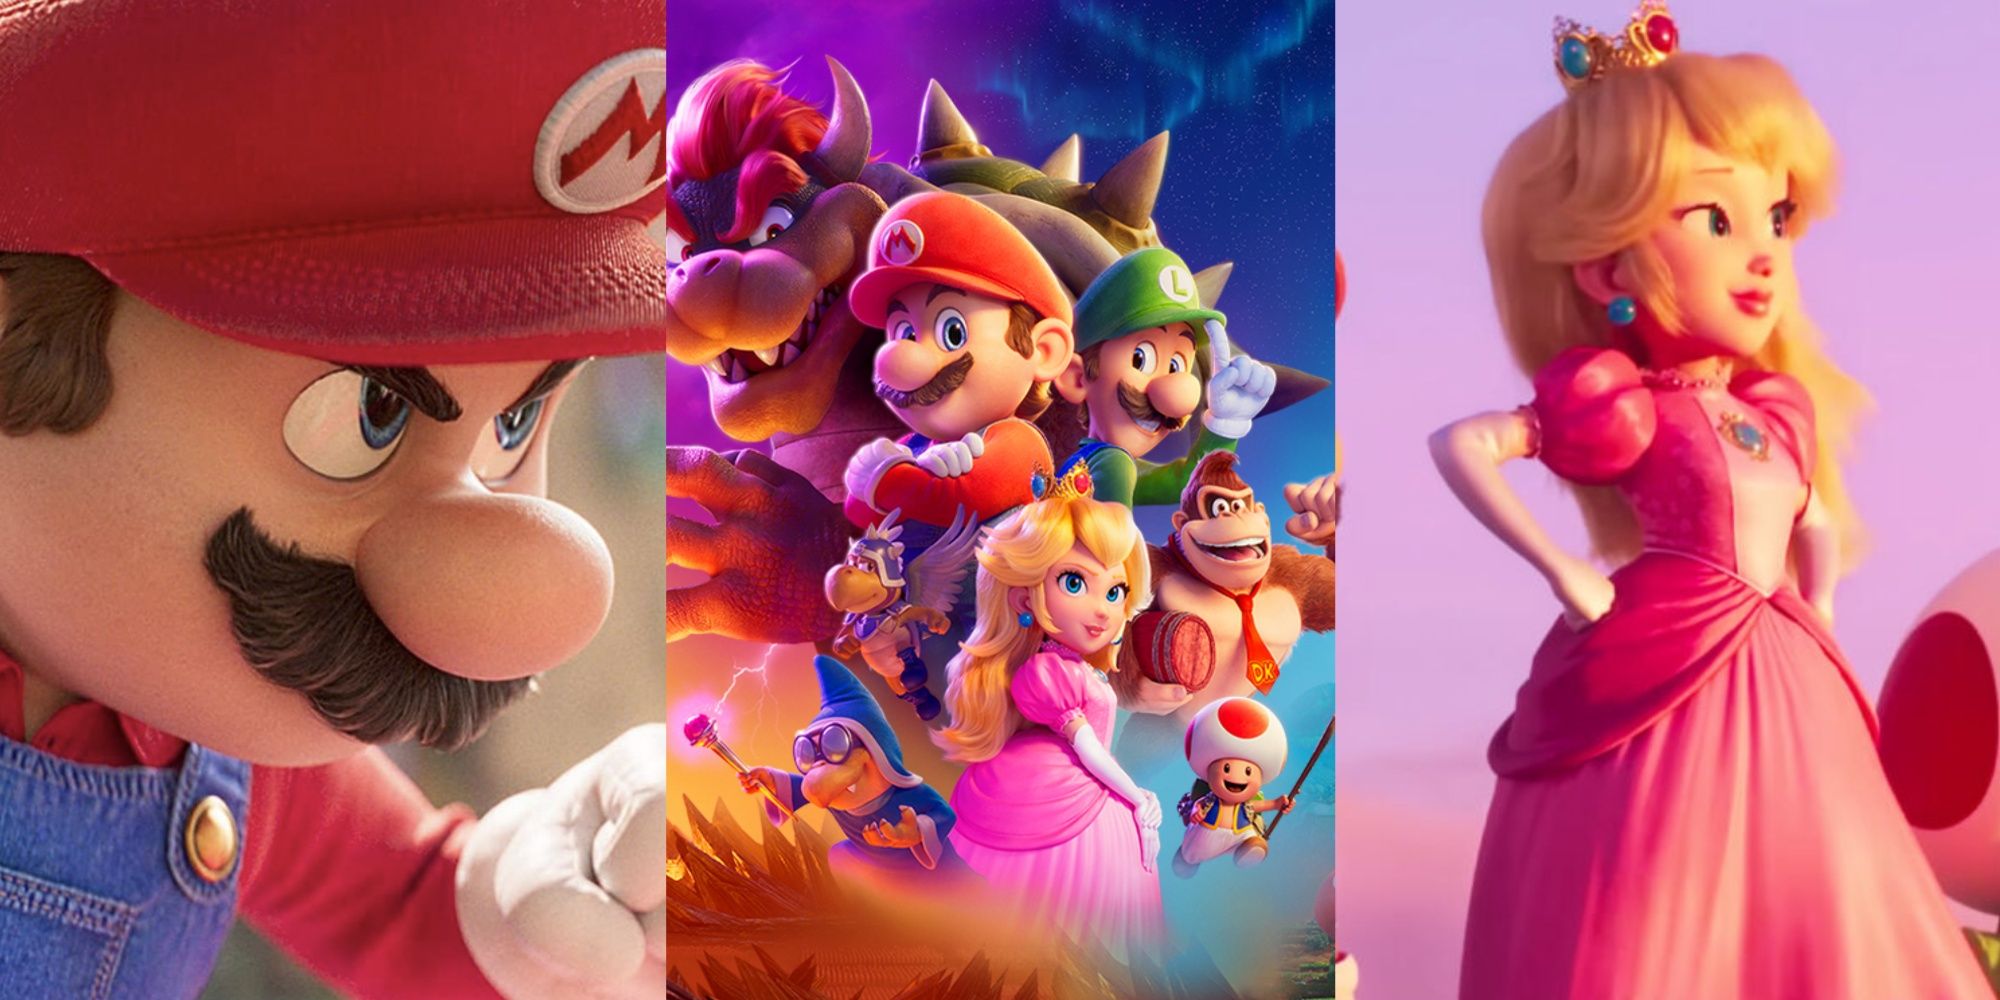 Mario looks determined, a shot of the cast of the Super Mario Bros Movie, and Peach glances off at the sunset